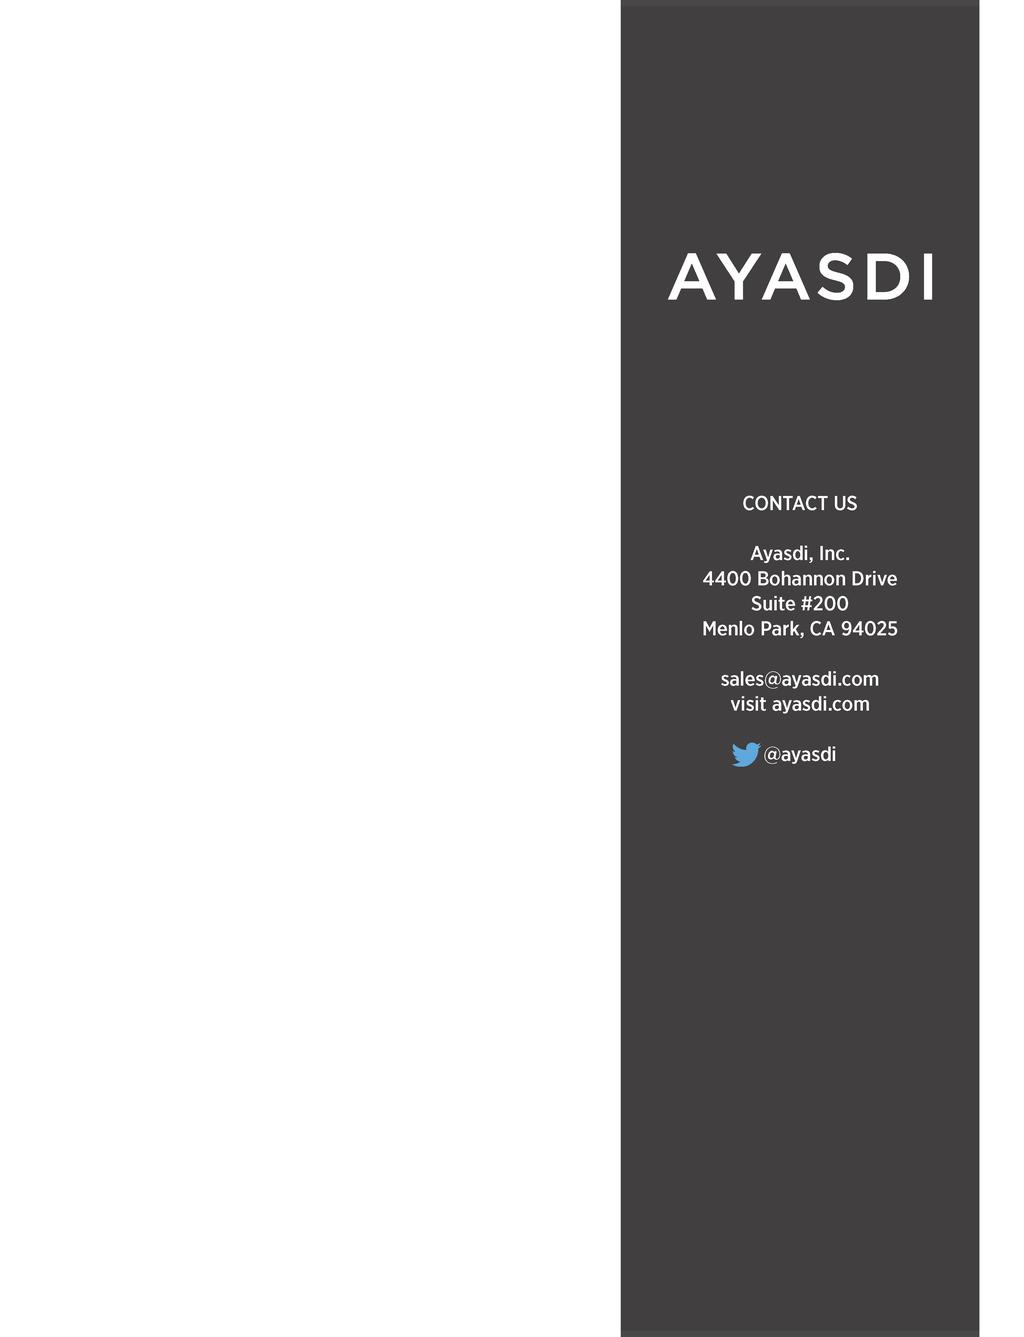 ABOUT AYASDI Ayasdi is on a mission to make the world s complex data useful by automating and accelerating insight discovery.